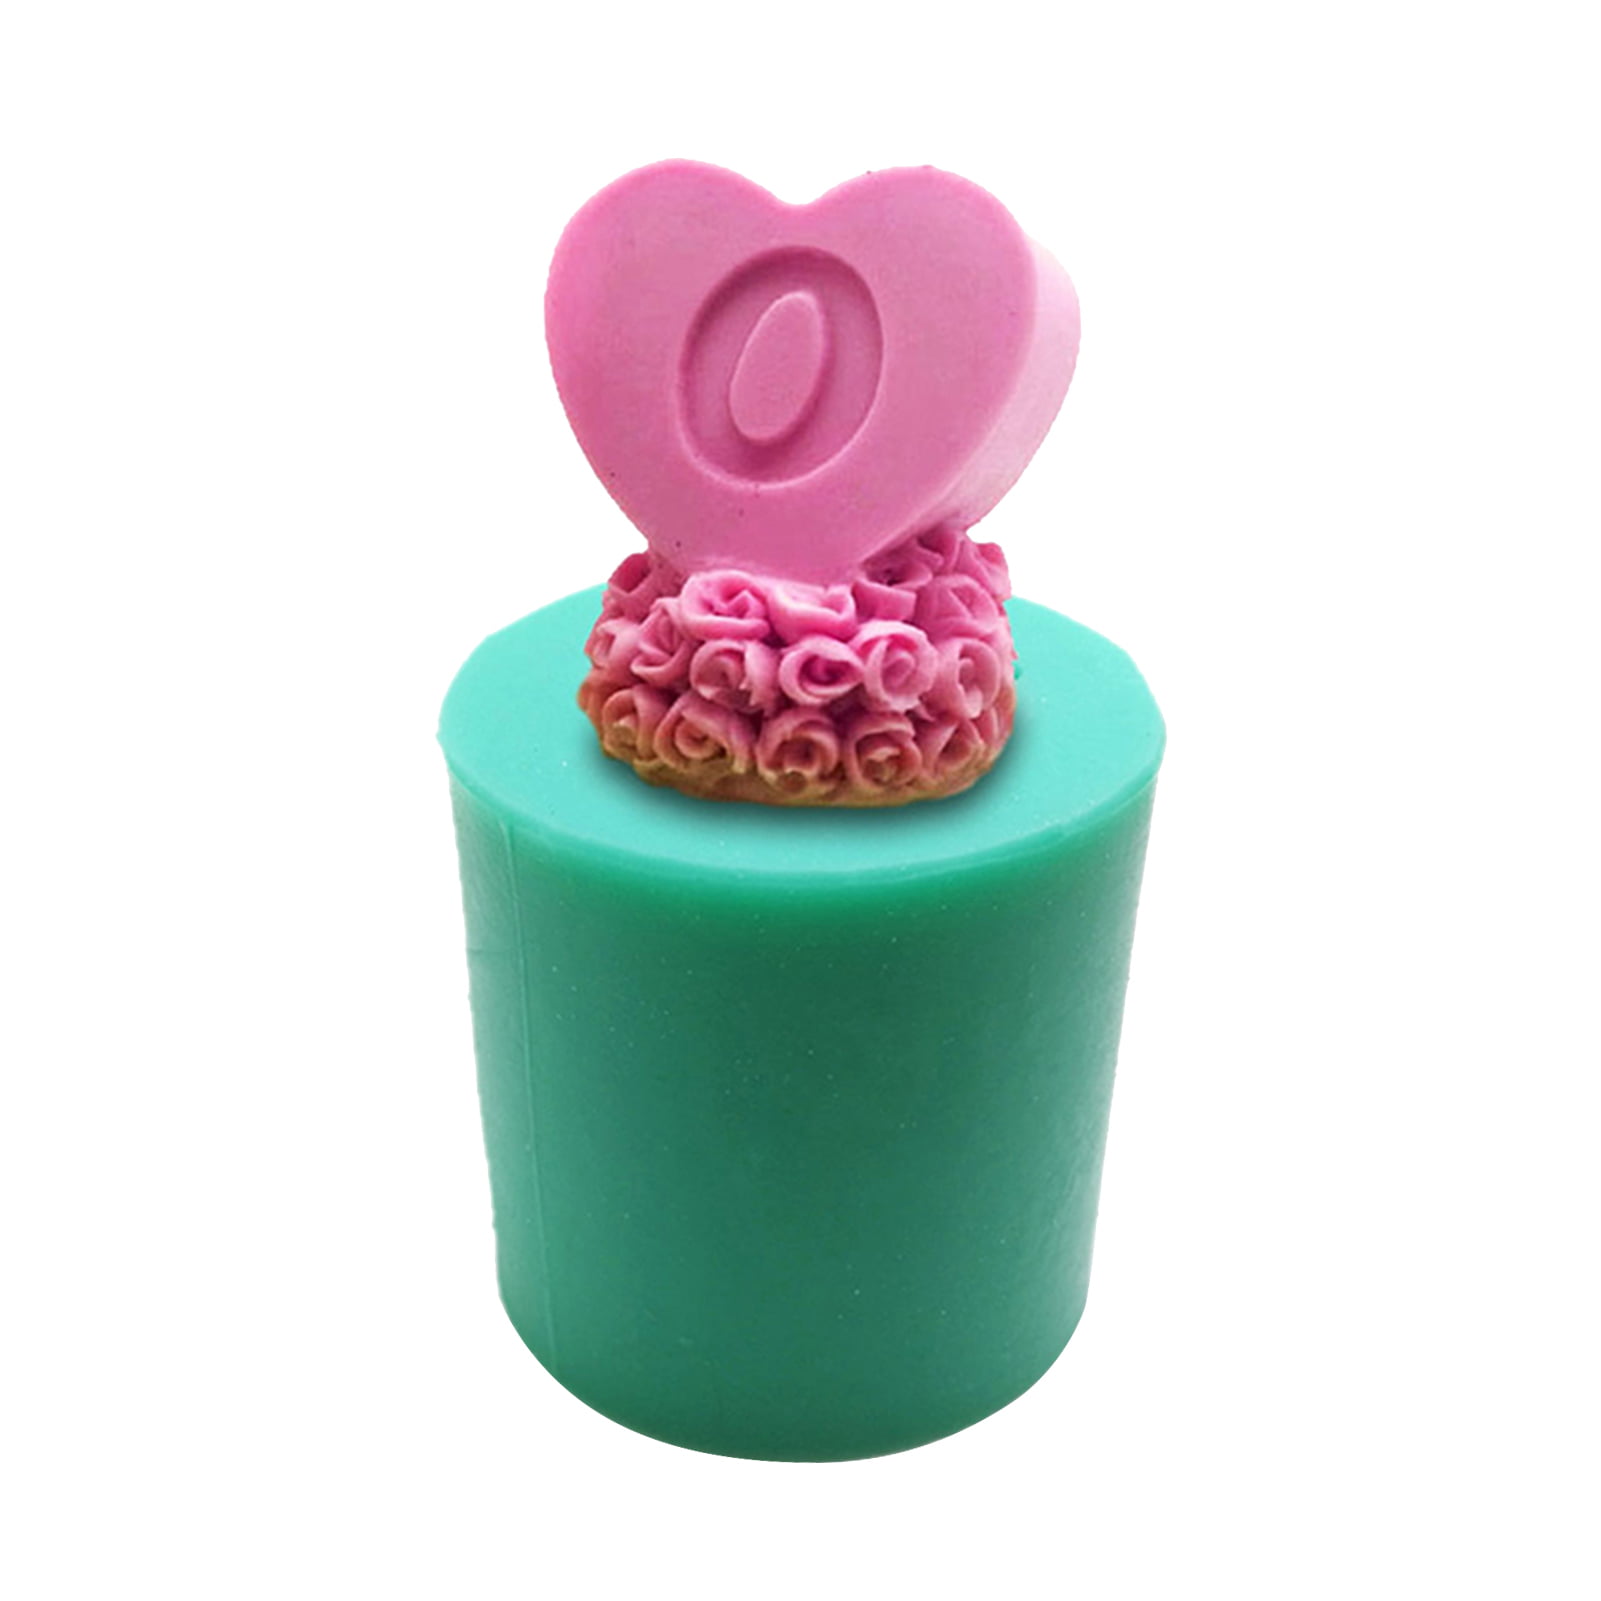 3D Heart Flowers Silicone Mold Fondant Mold Cake Chocolate Decorating Tools WRDE 